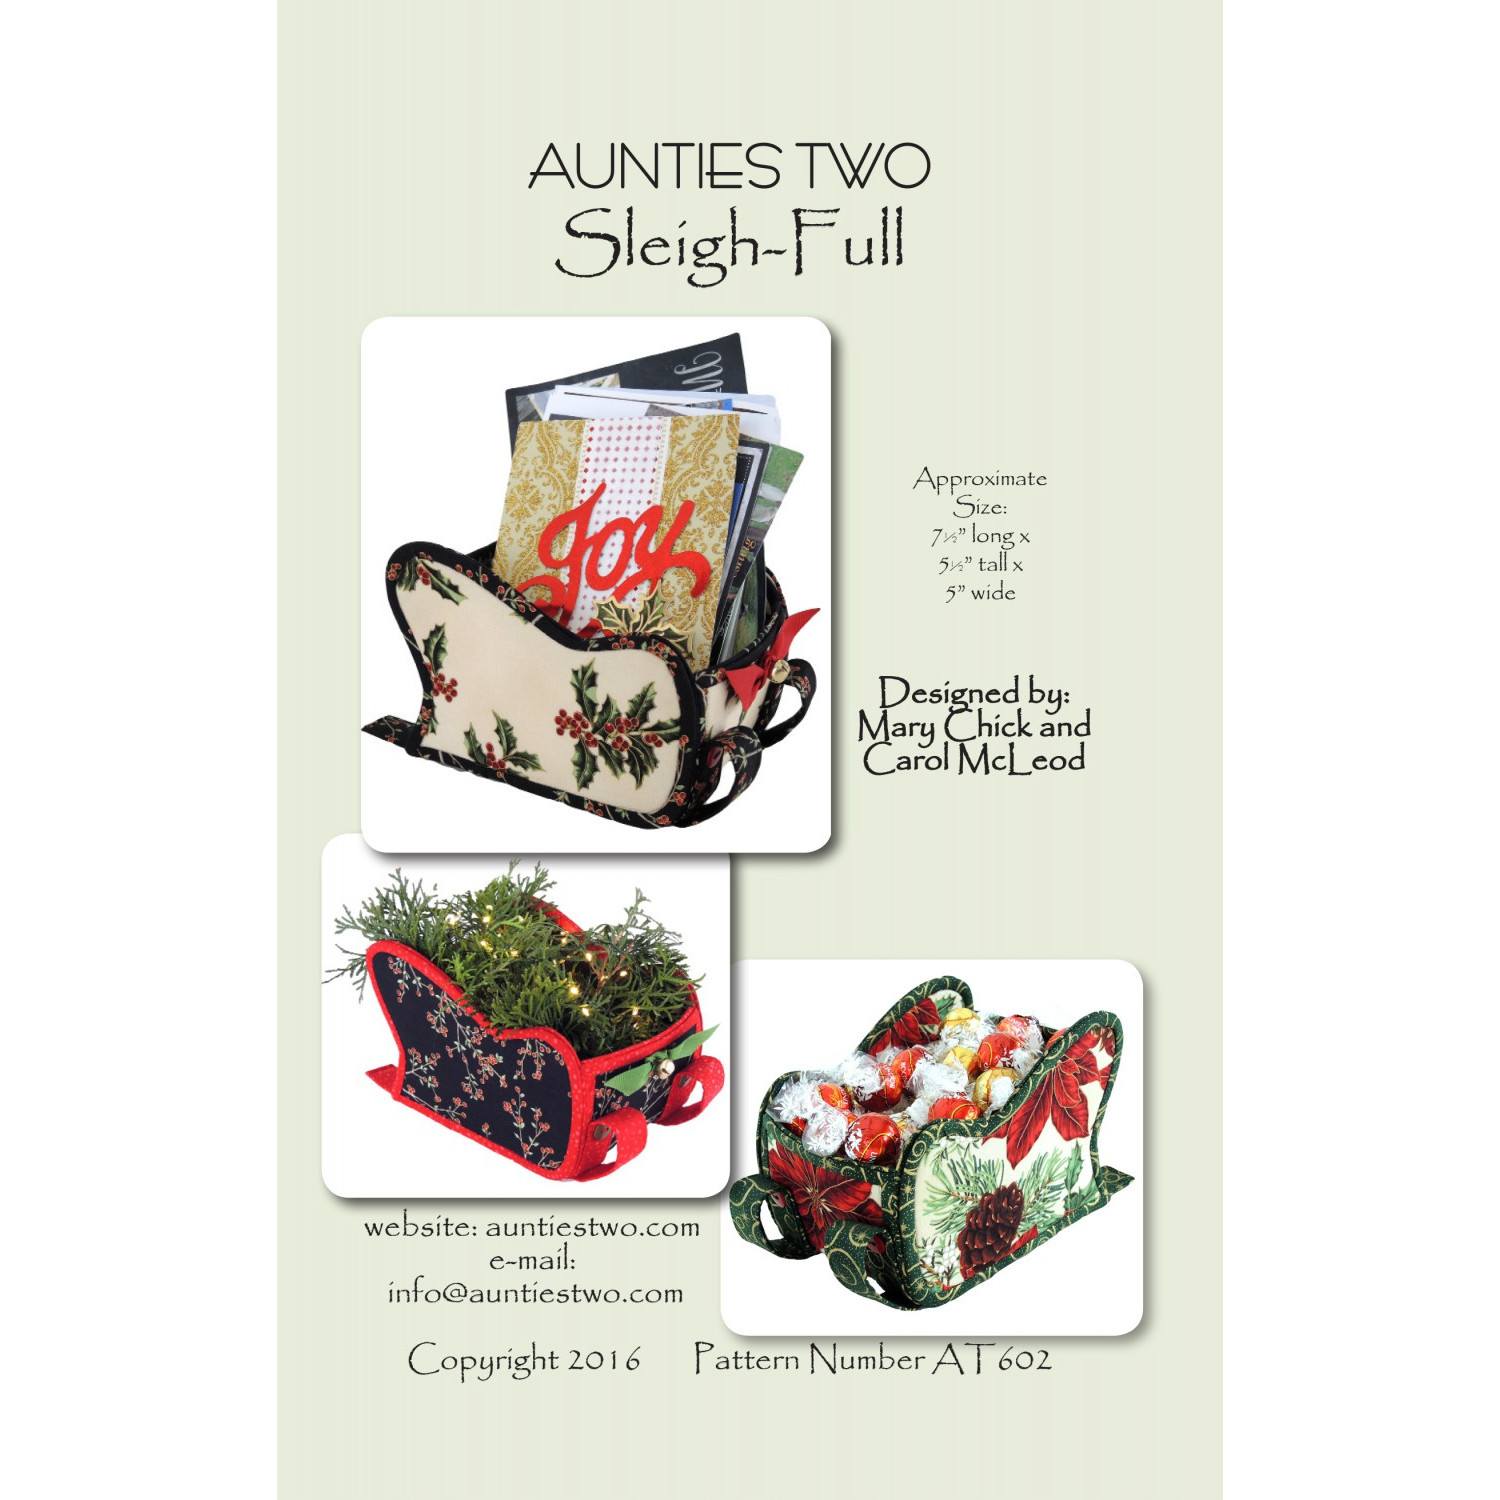 Sleigh-Full Pattern, Aunties Two Patterns image # 35893